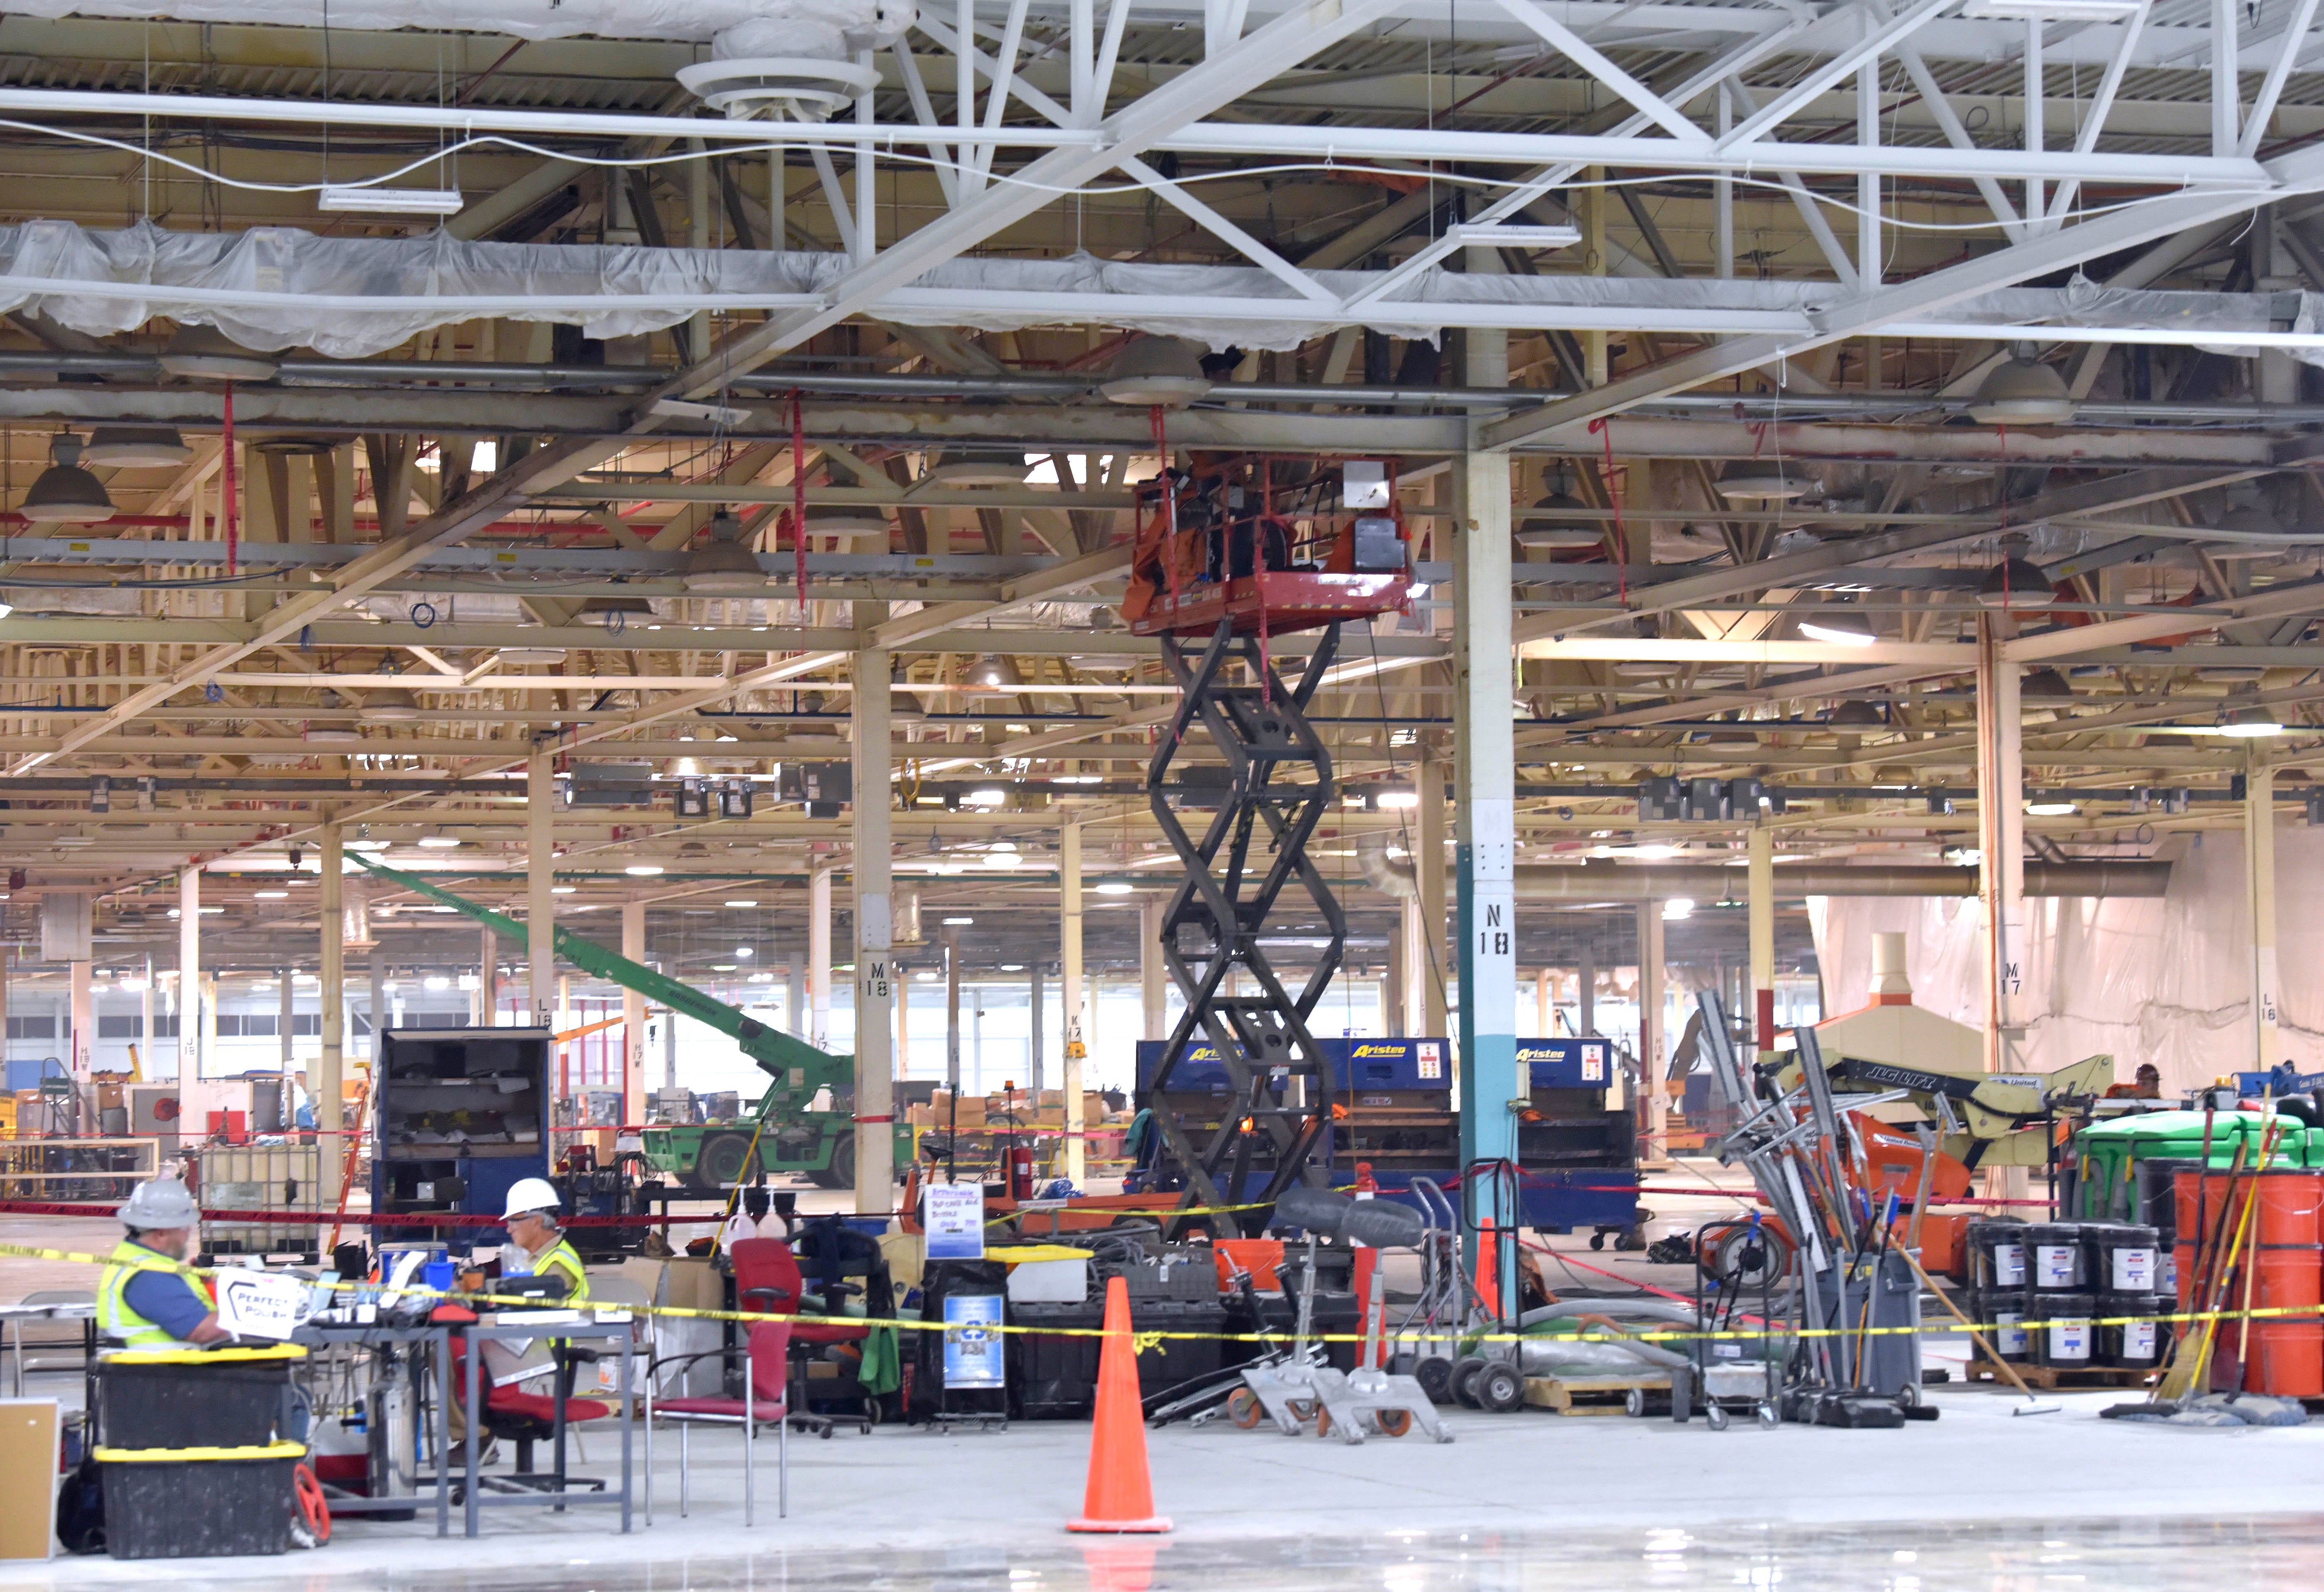 This is Mack 1, the former Pentastar engine area that is being converted into general assembly.